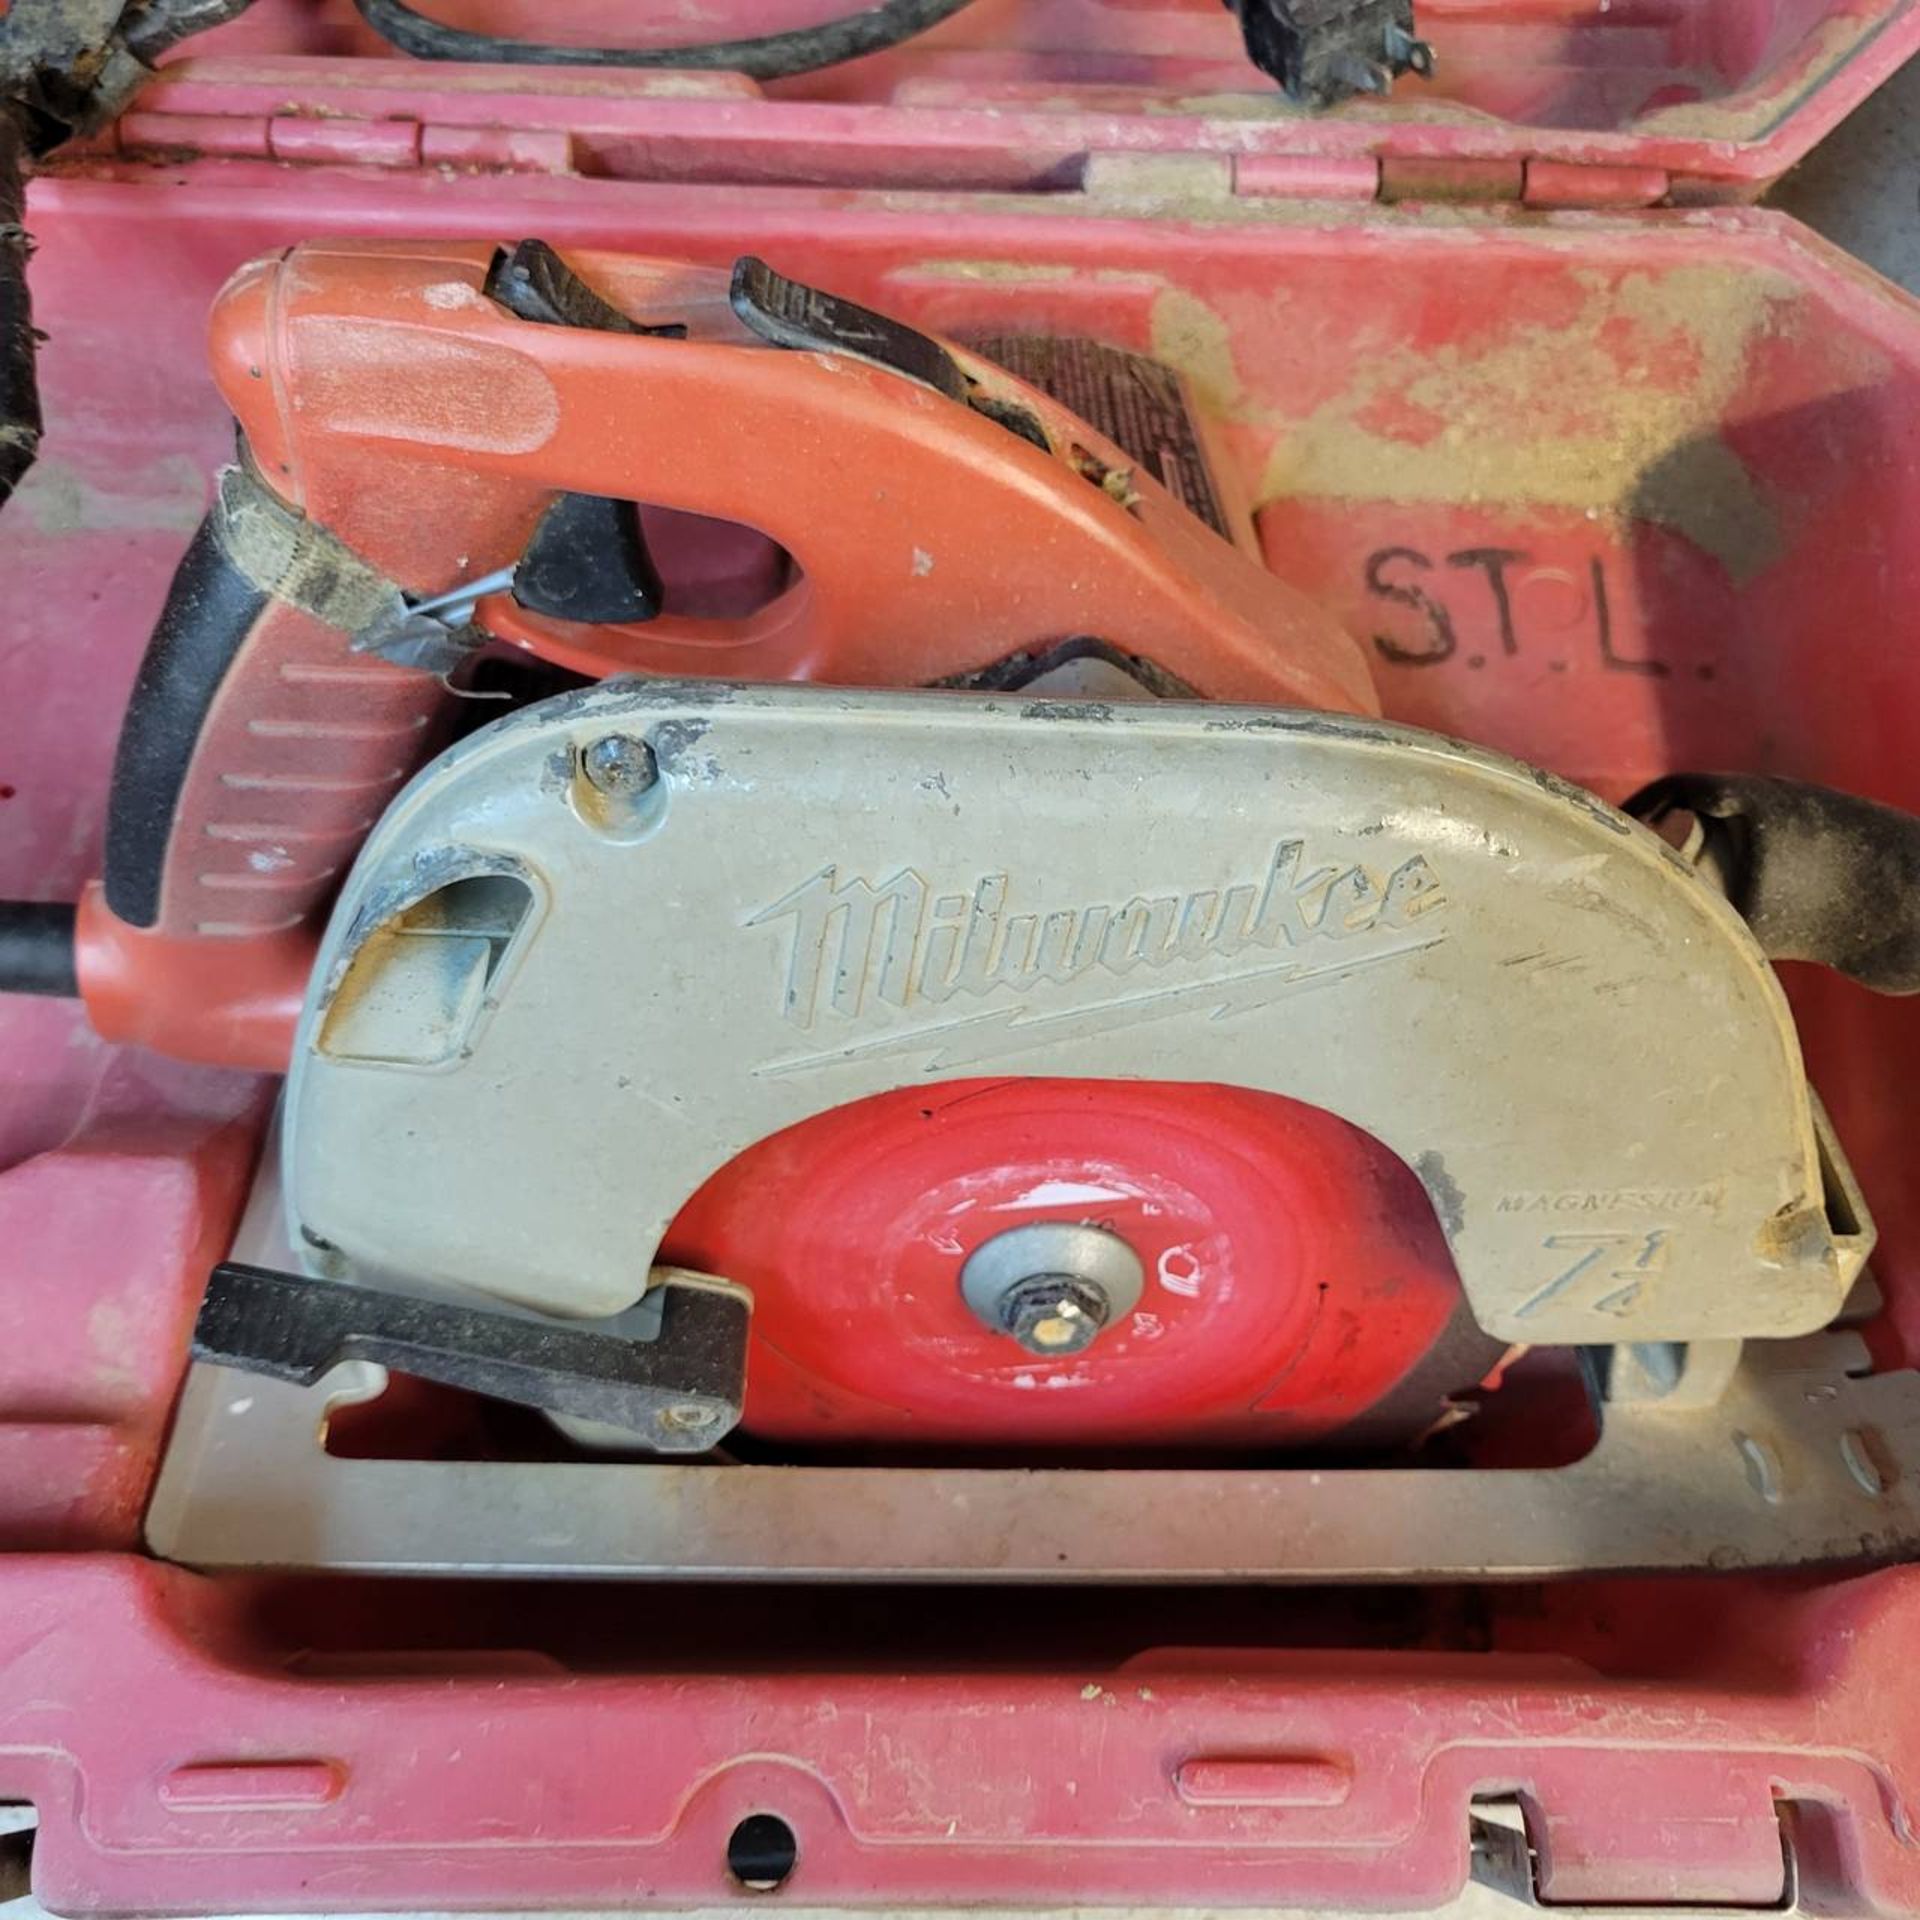 Milwaukee 6390-20 7 1/4" Circular saw with case - Image 2 of 3